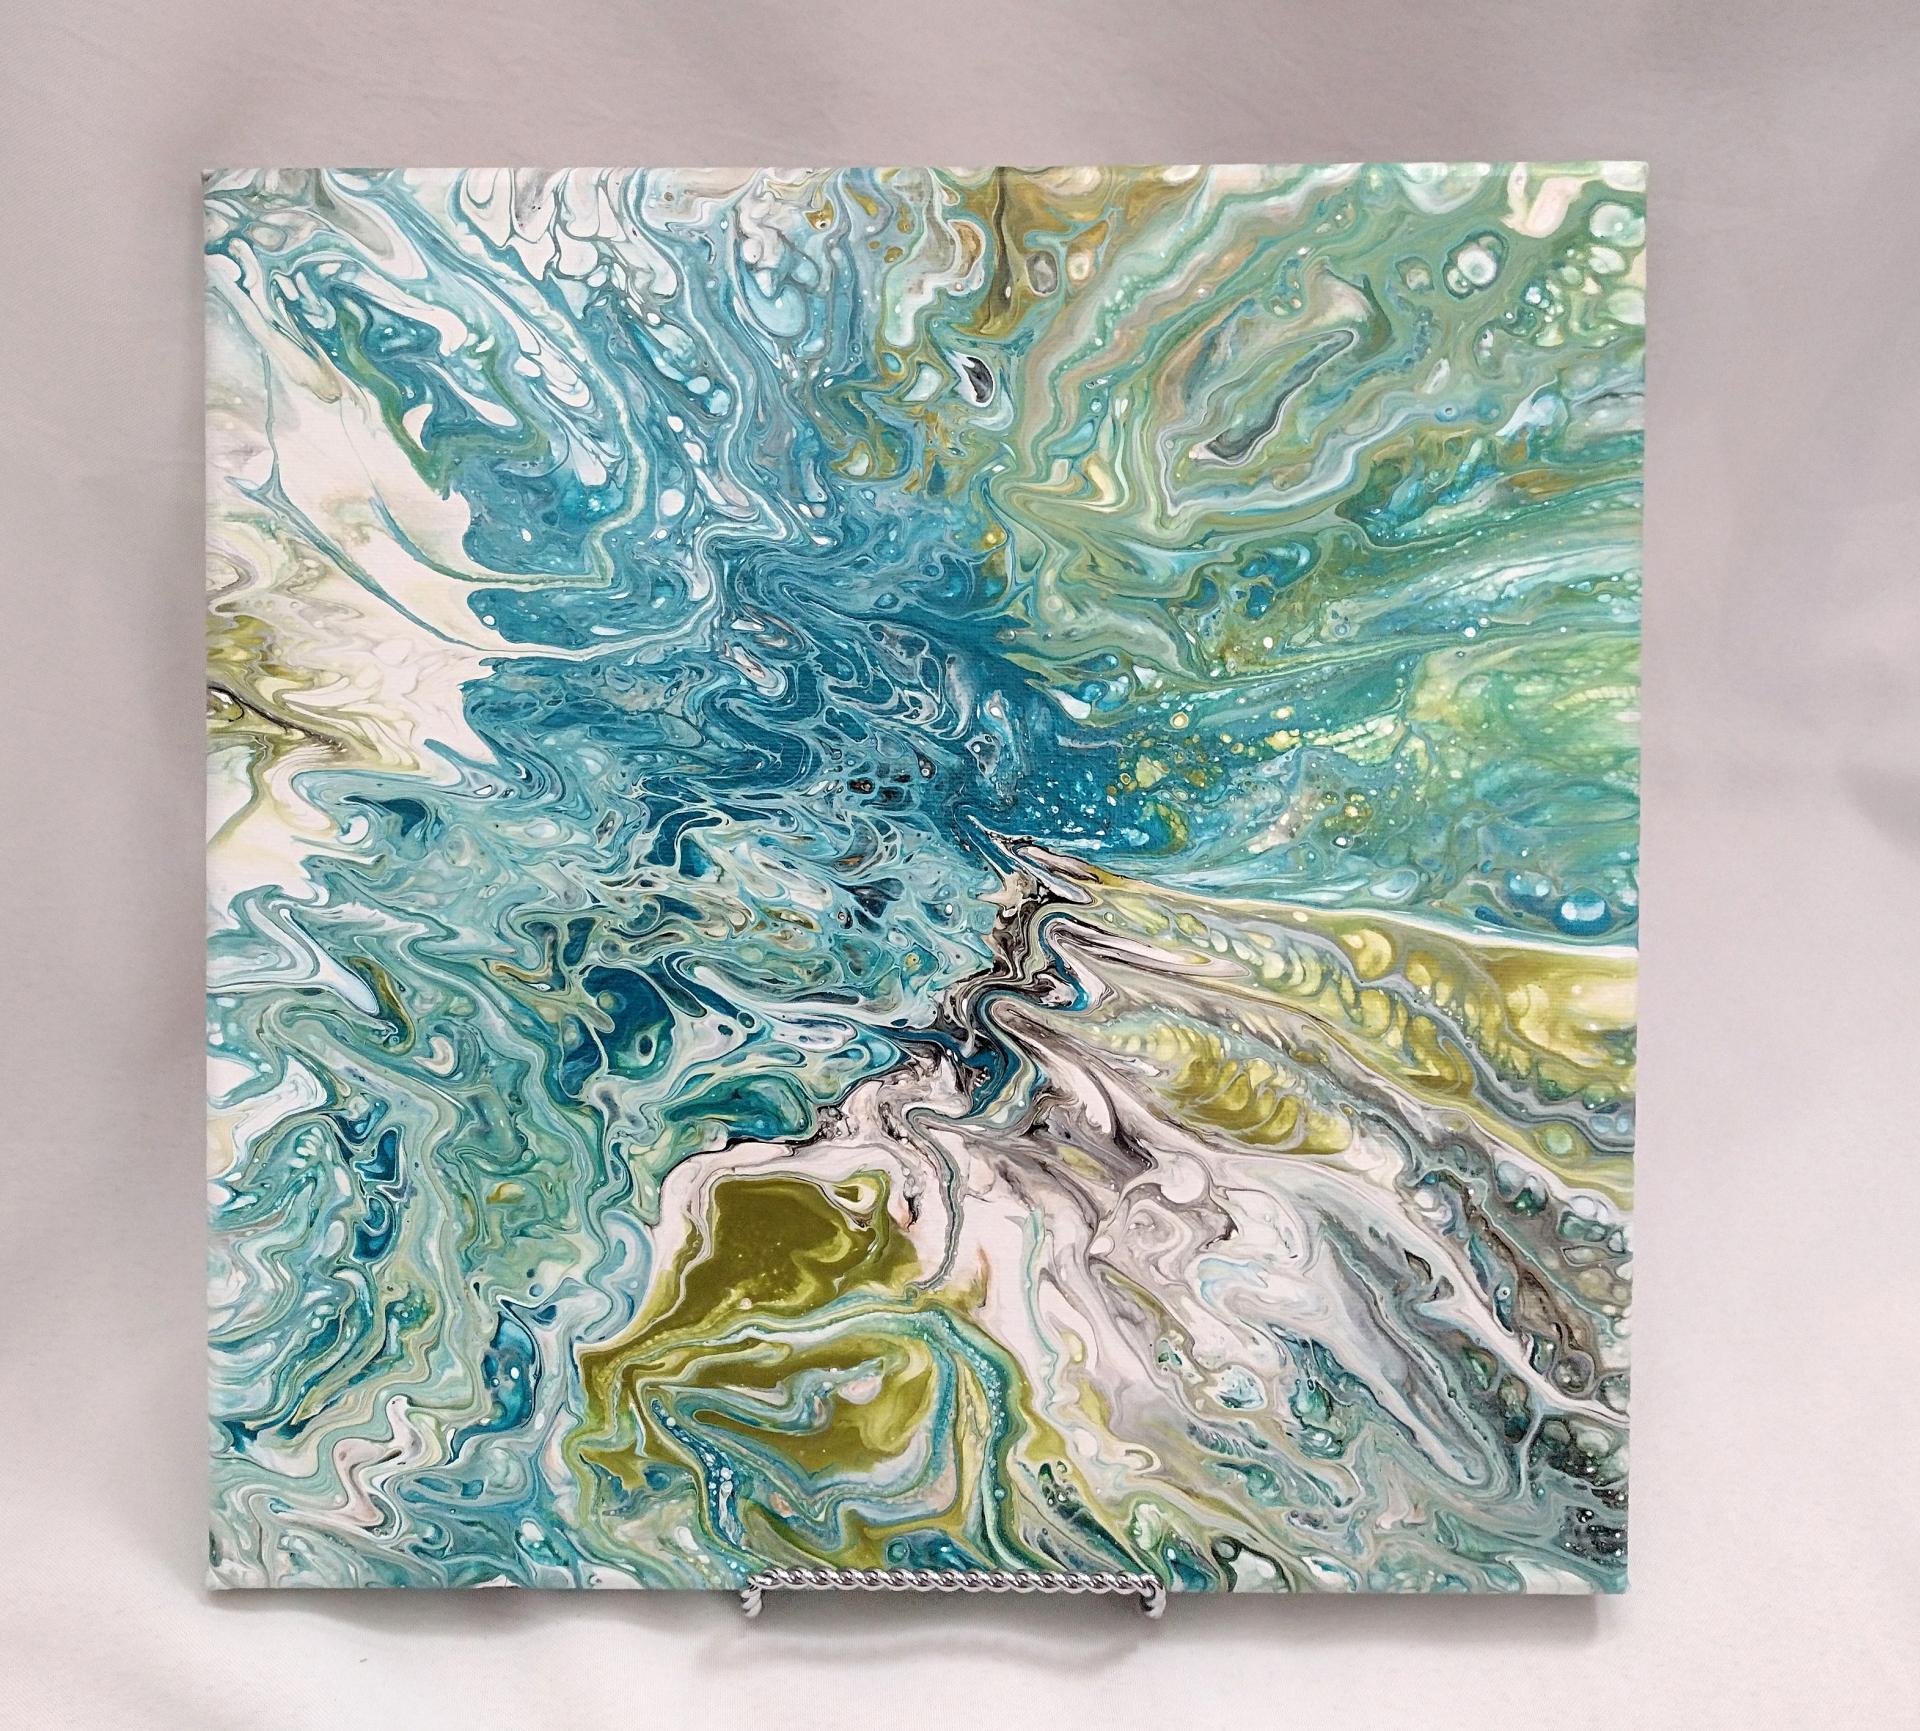 Green and Blue Abstract Original Acrylic Pour Painting, 12" x 12", Fluid Art Painting